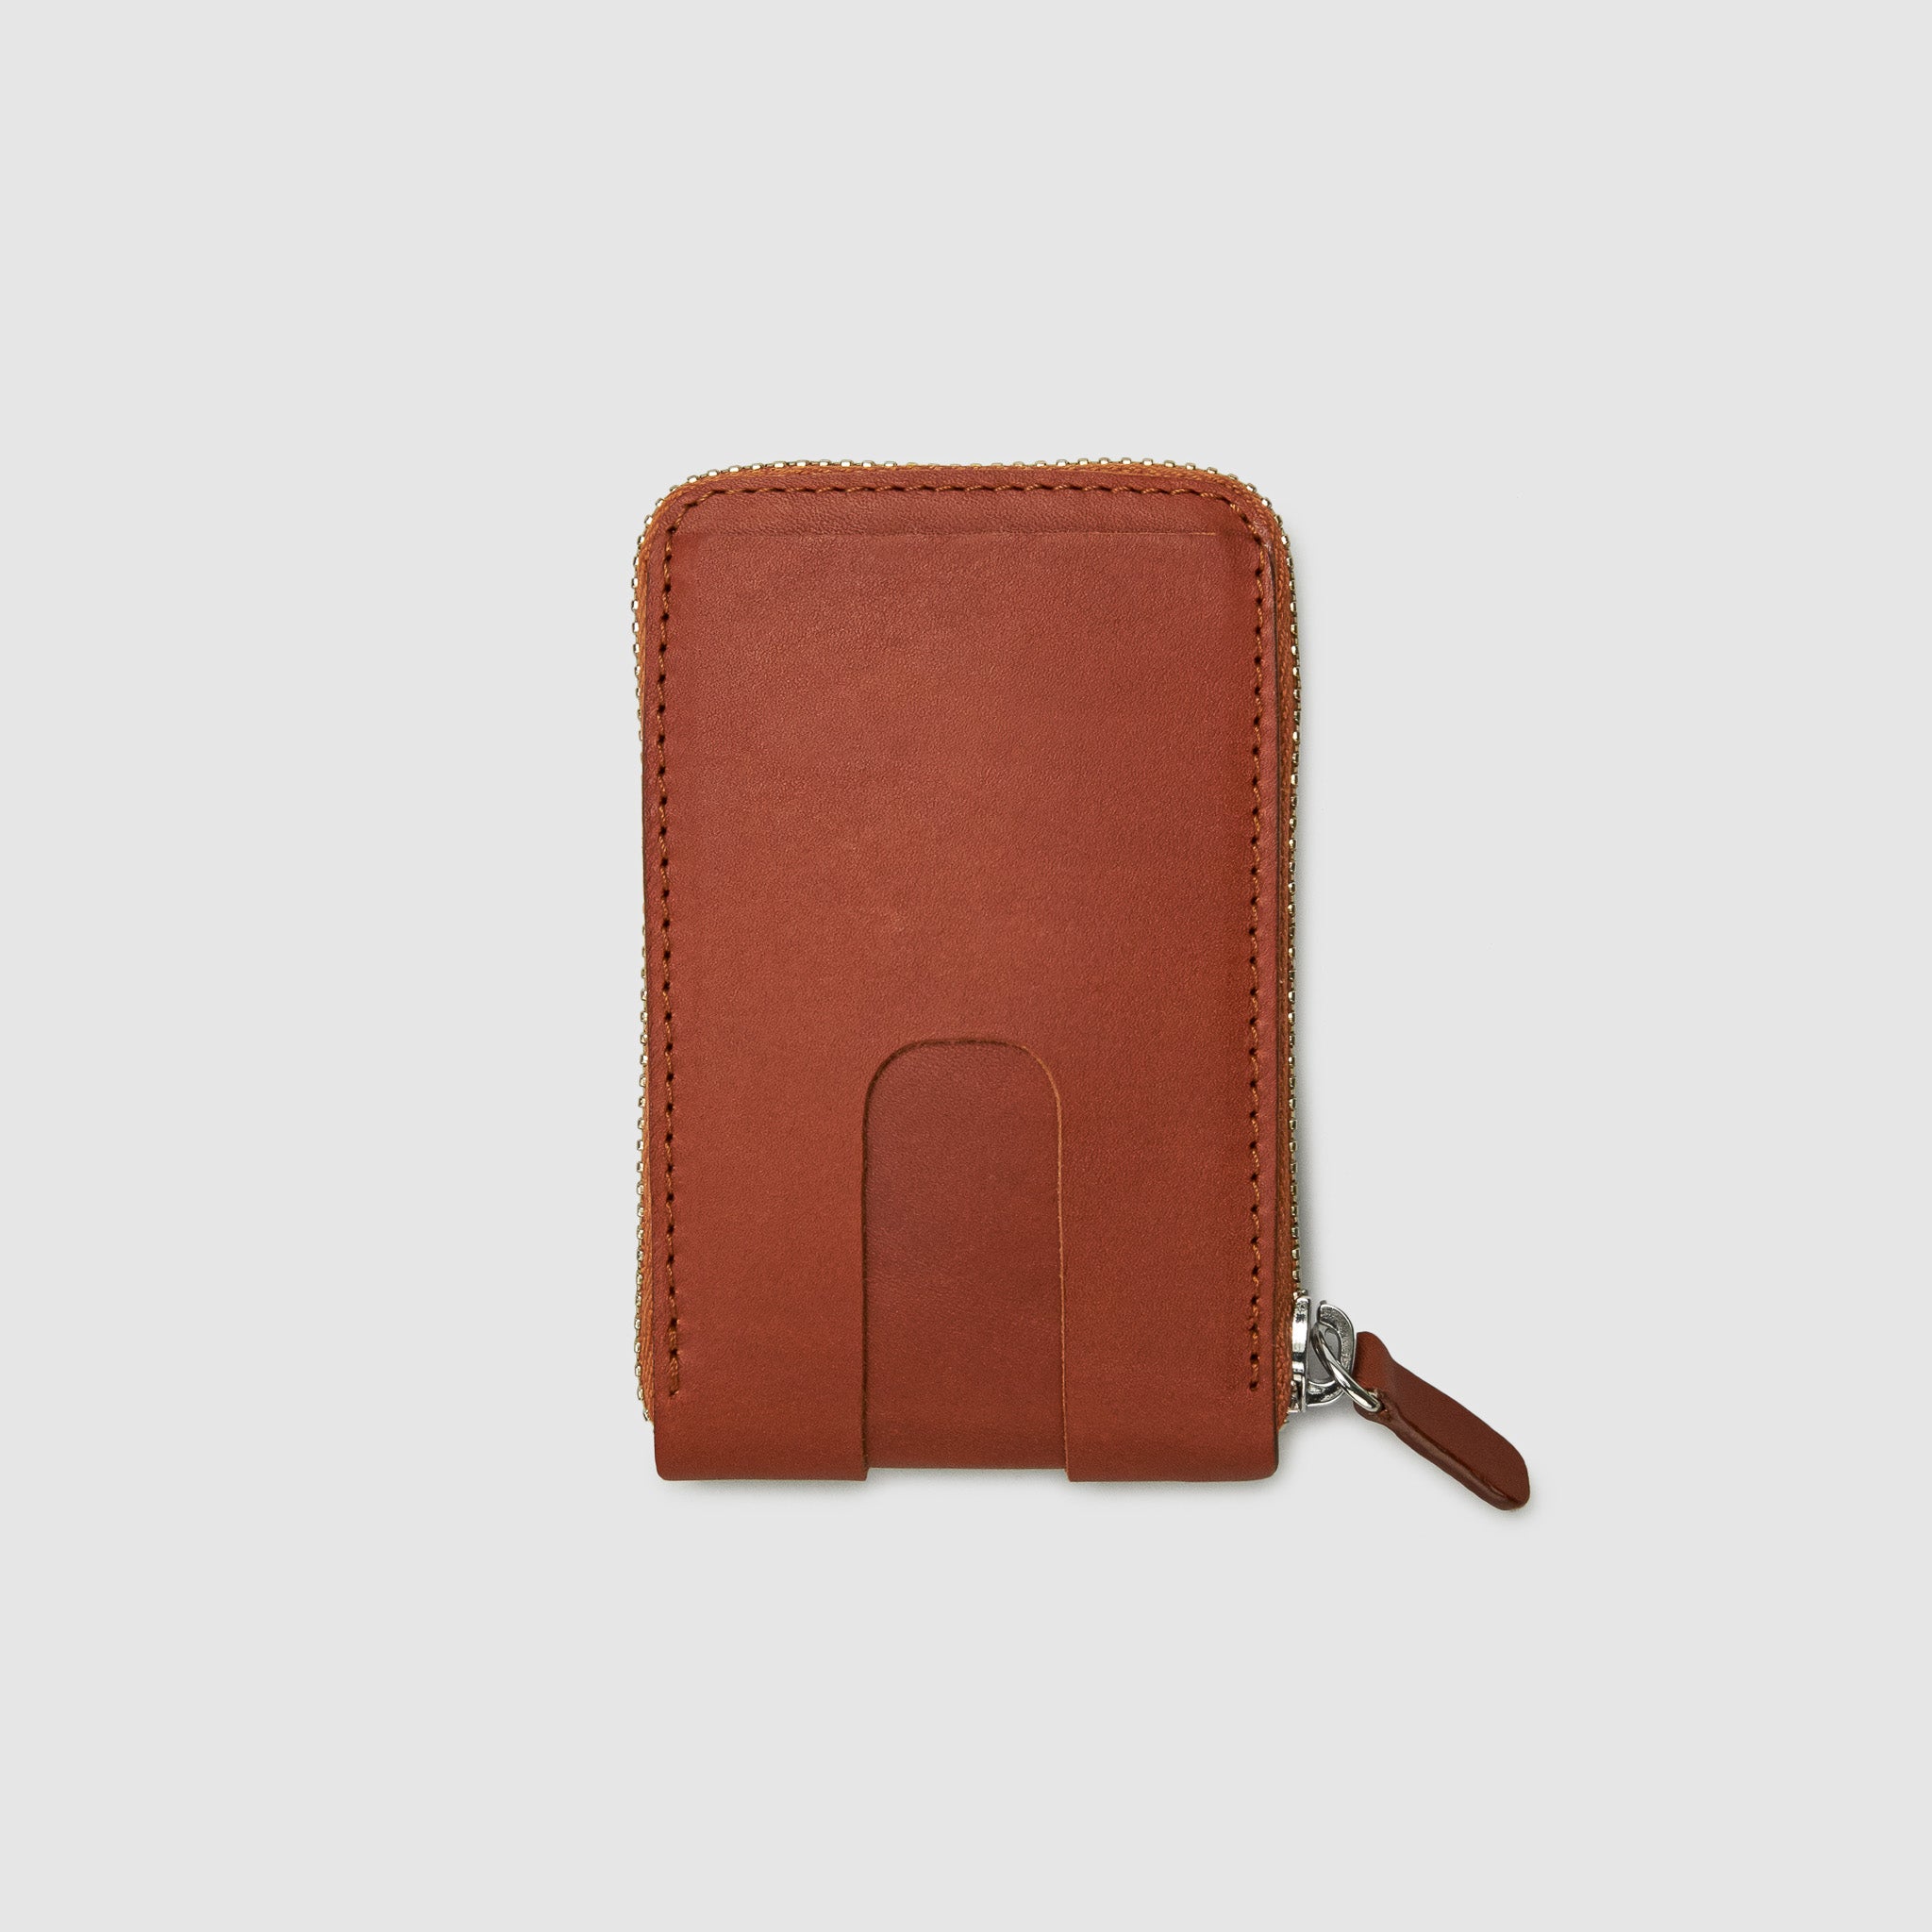 zippy wallet products for sale